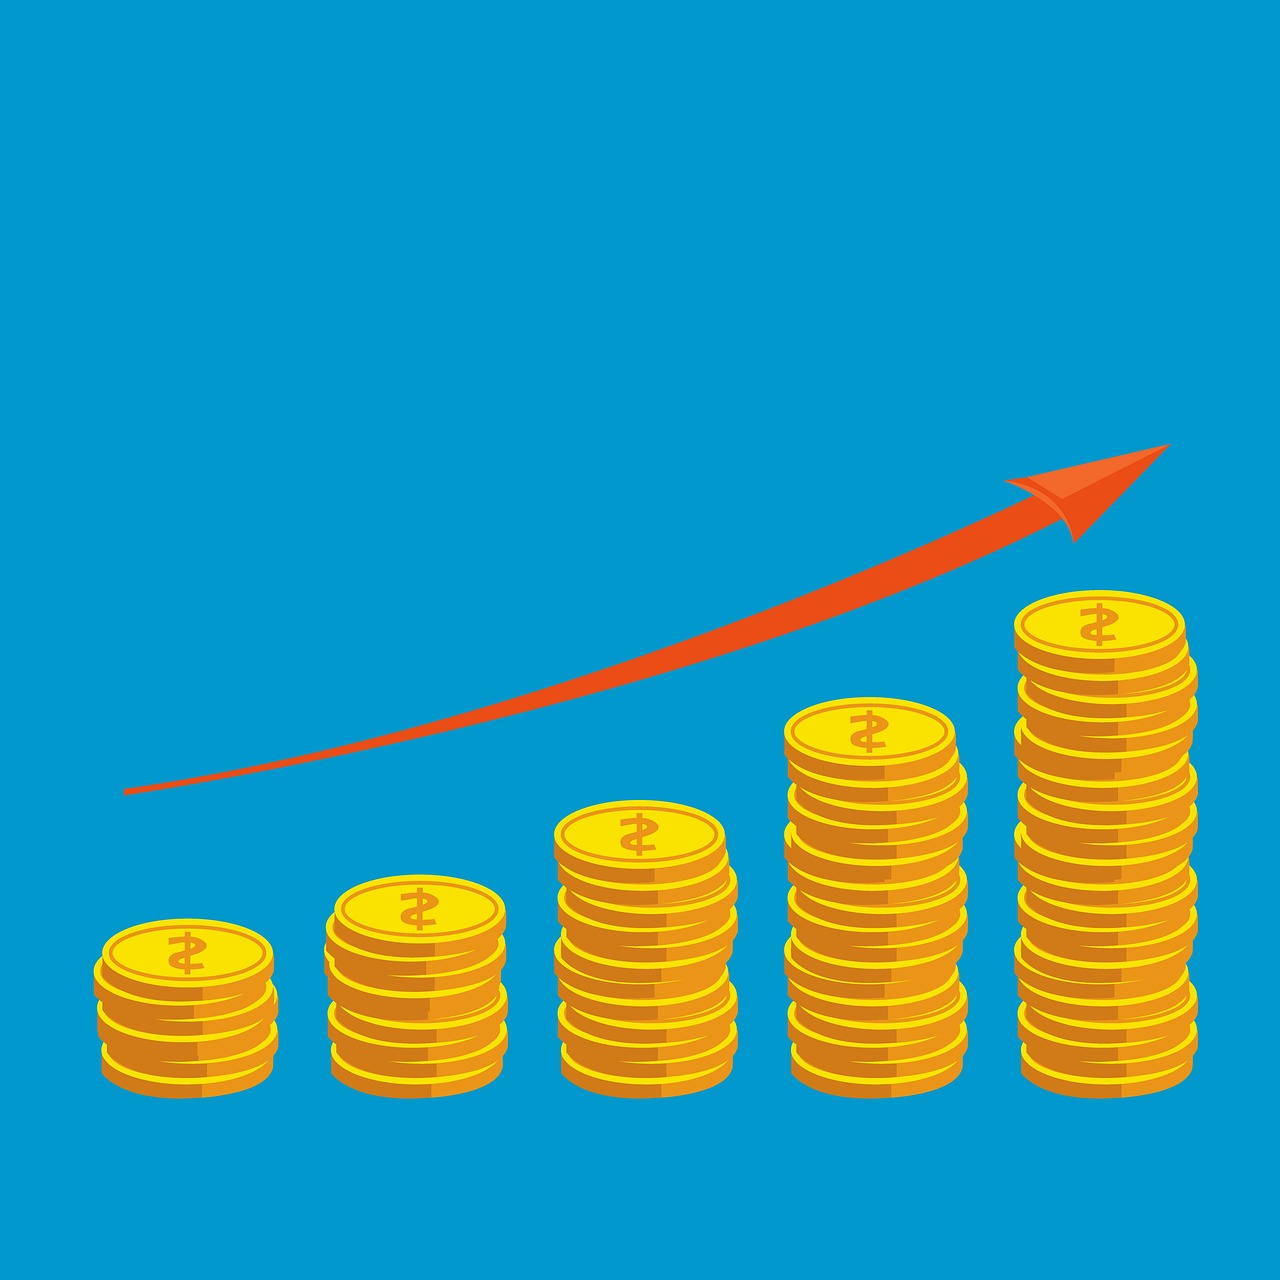 A cartoon image of coins stacking, showing higher pricing